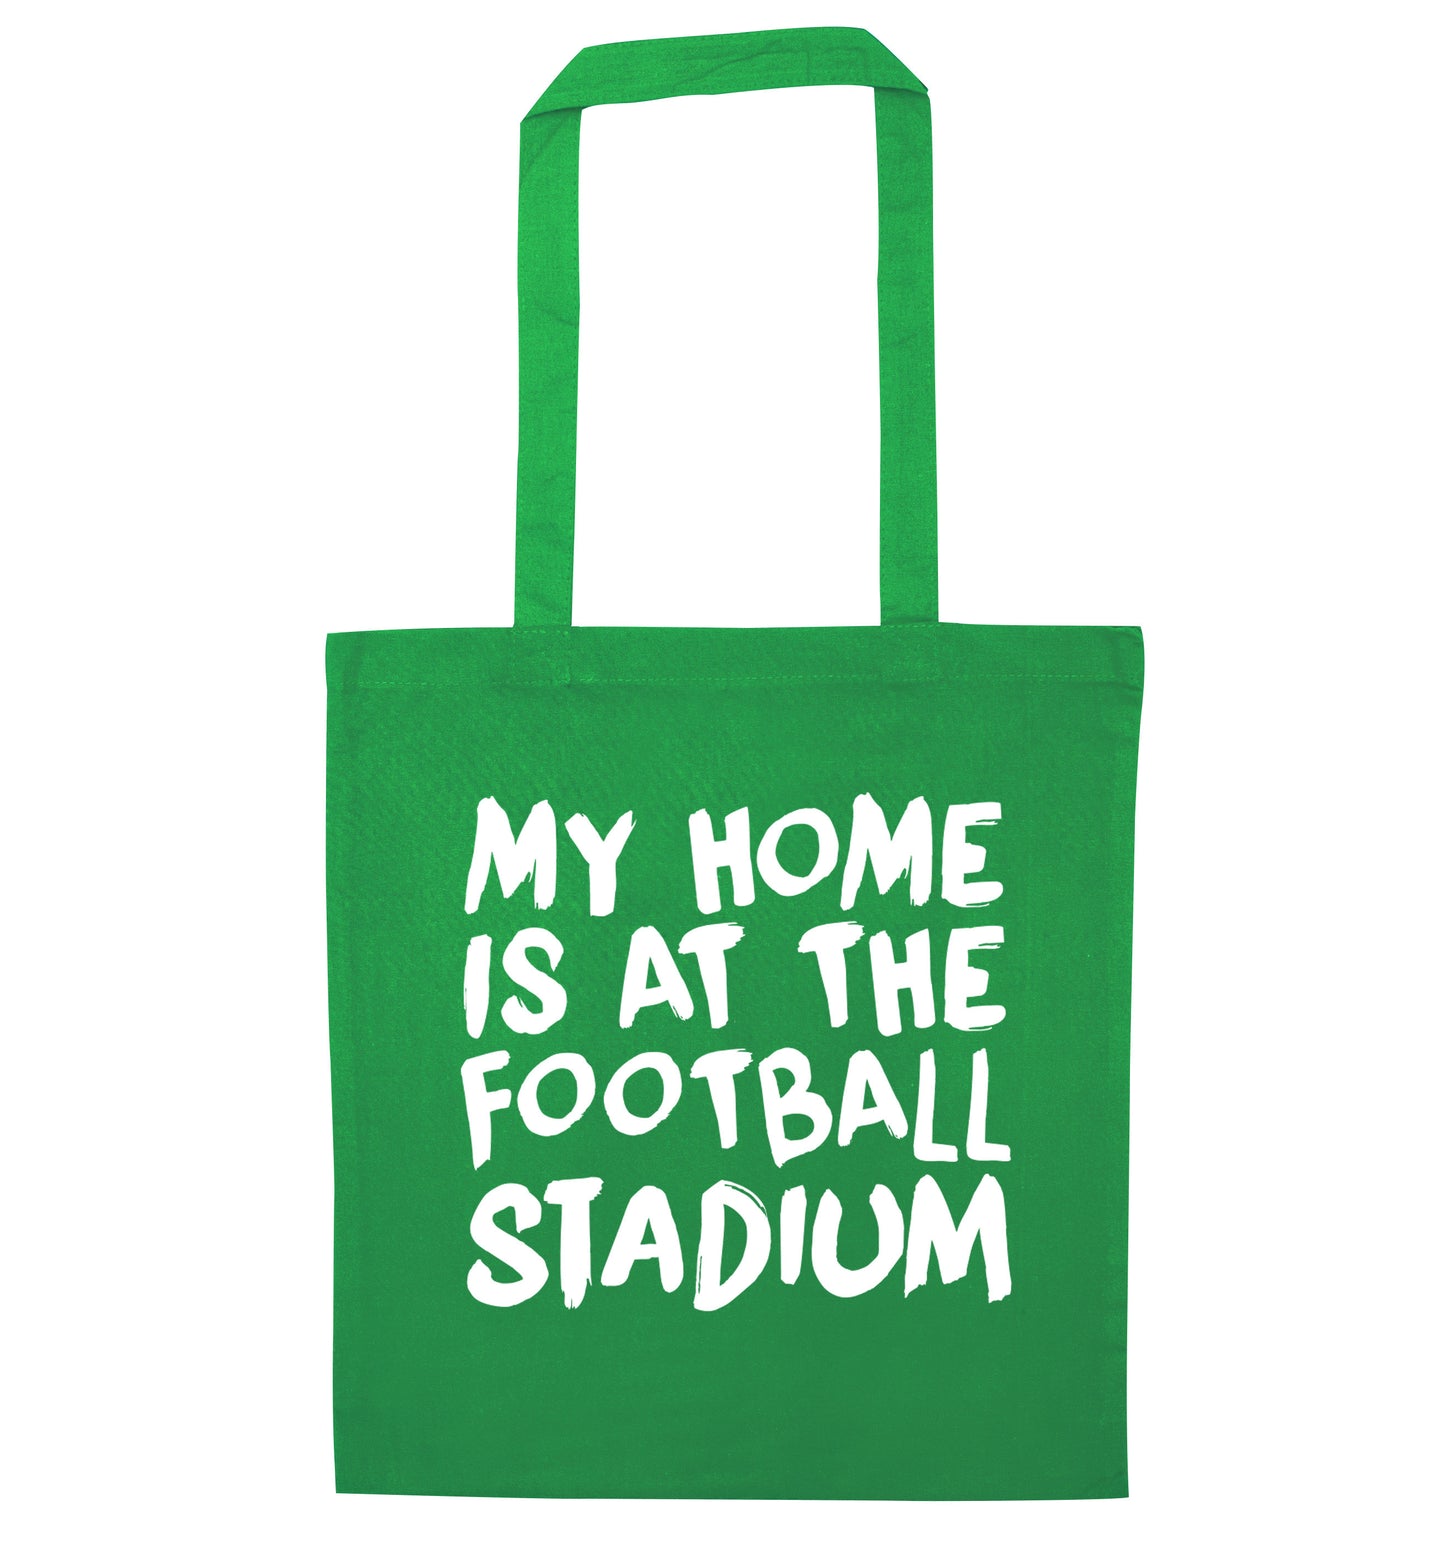 My home is at the football stadium green tote bag